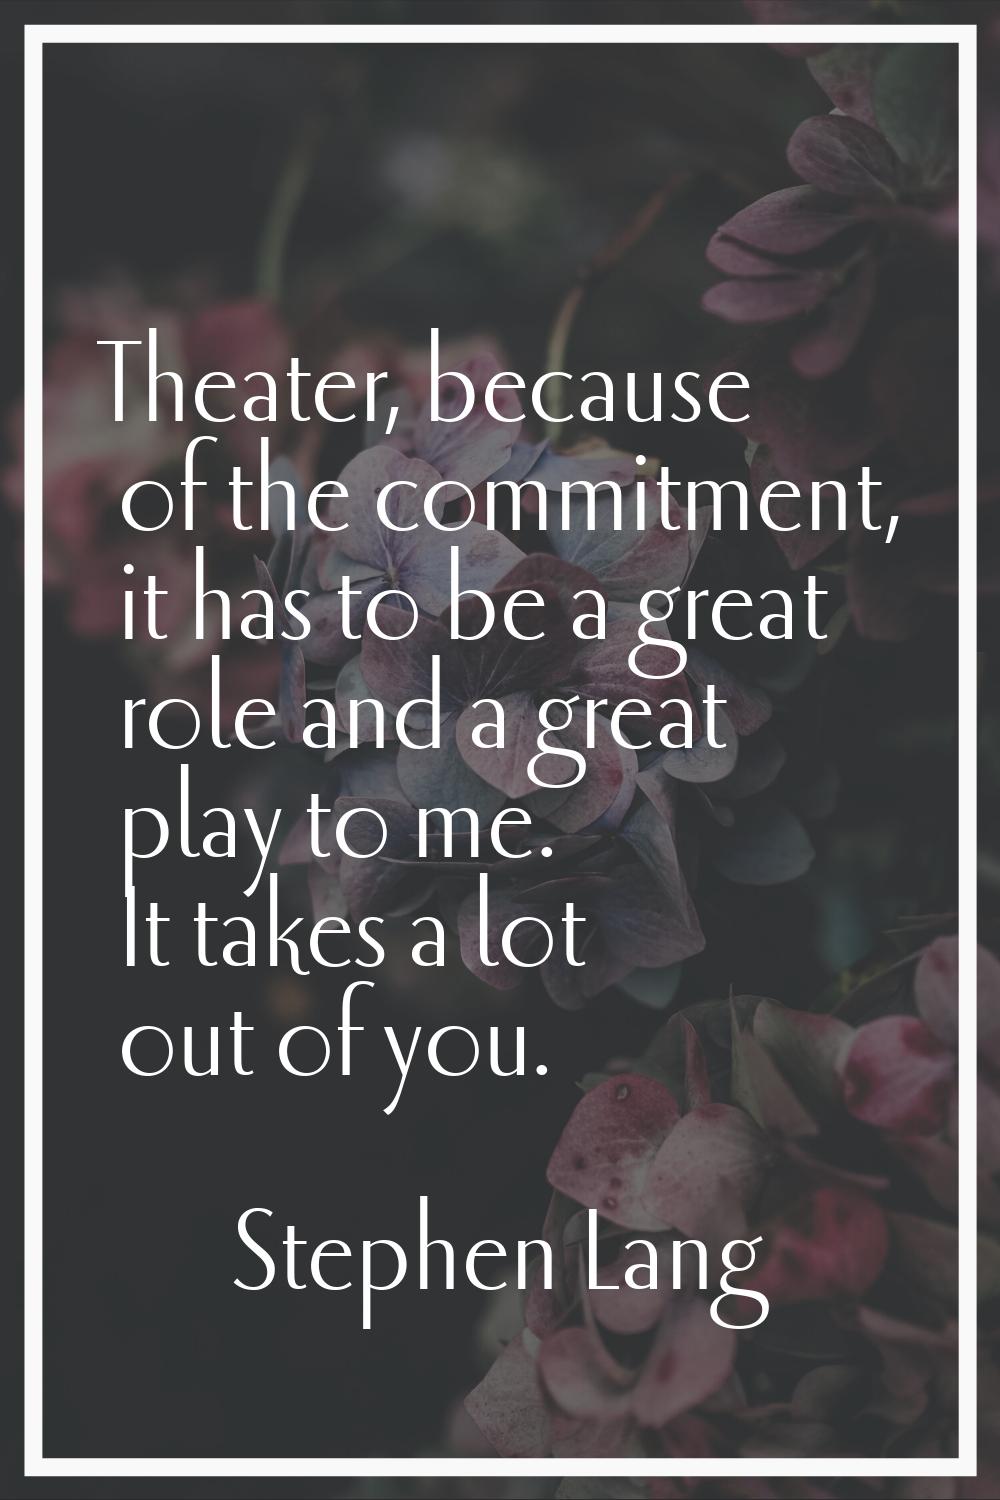 Theater, because of the commitment, it has to be a great role and a great play to me. It takes a lo